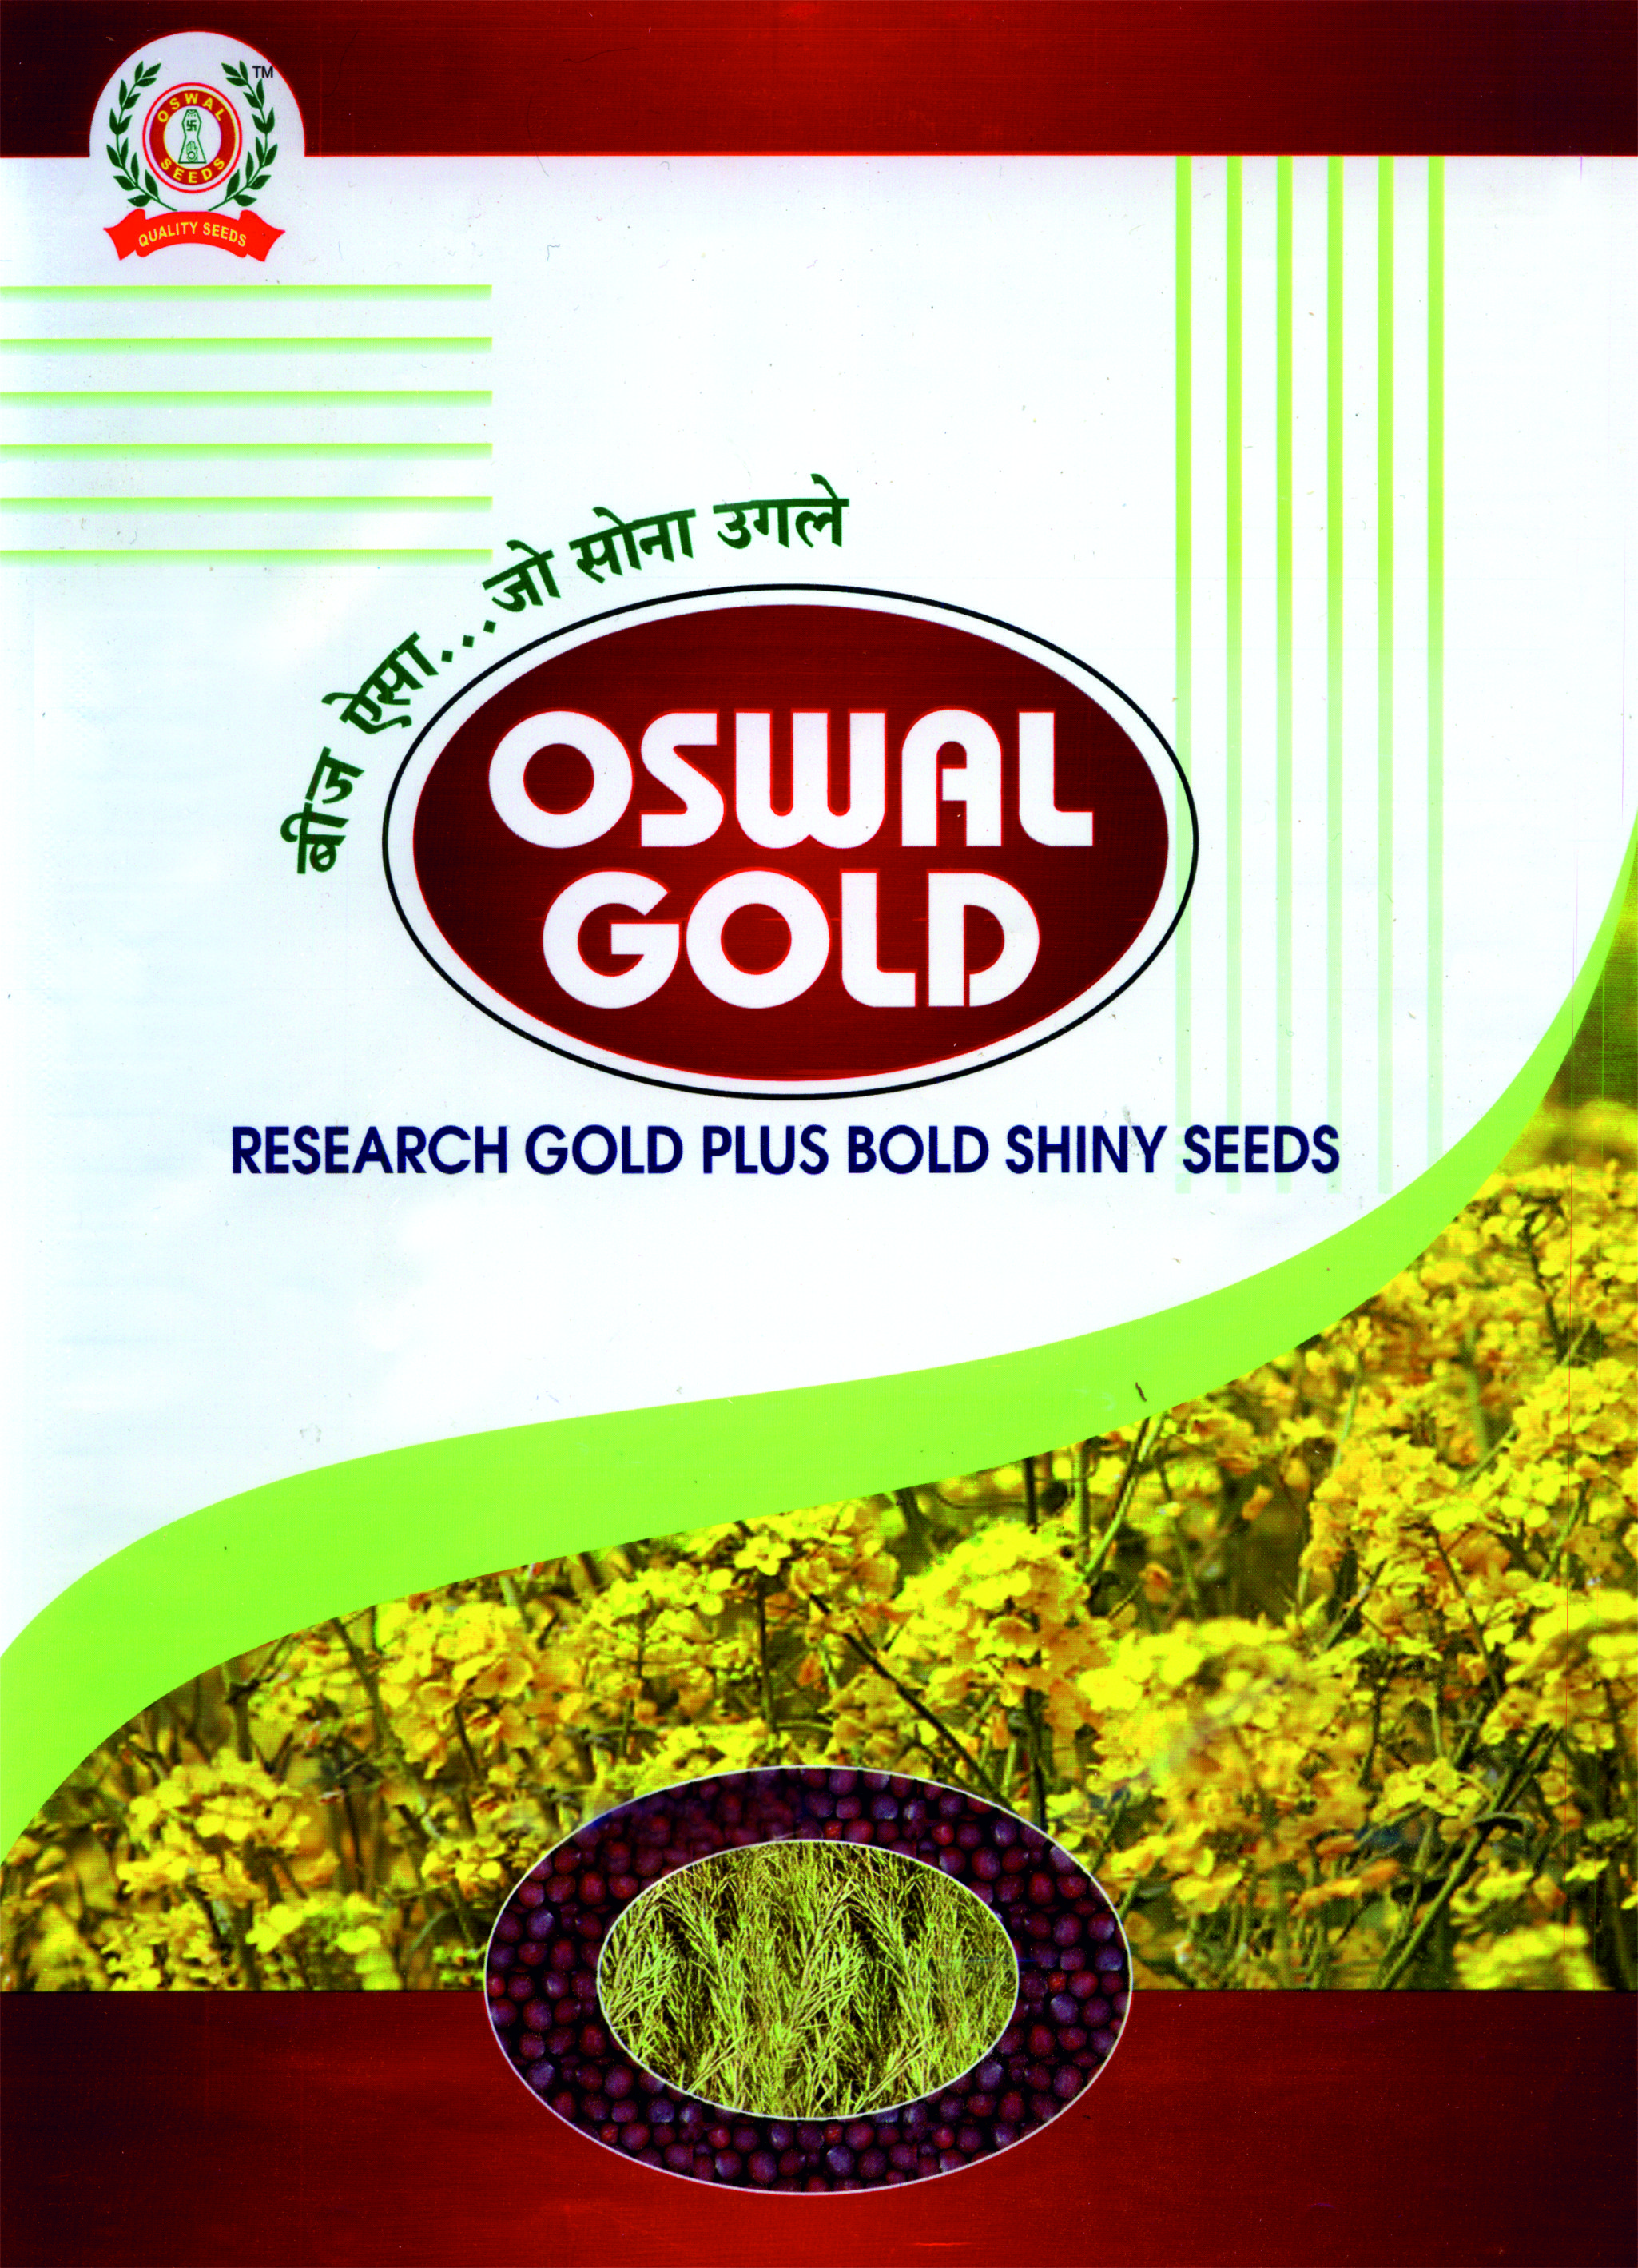 Oswal Gold